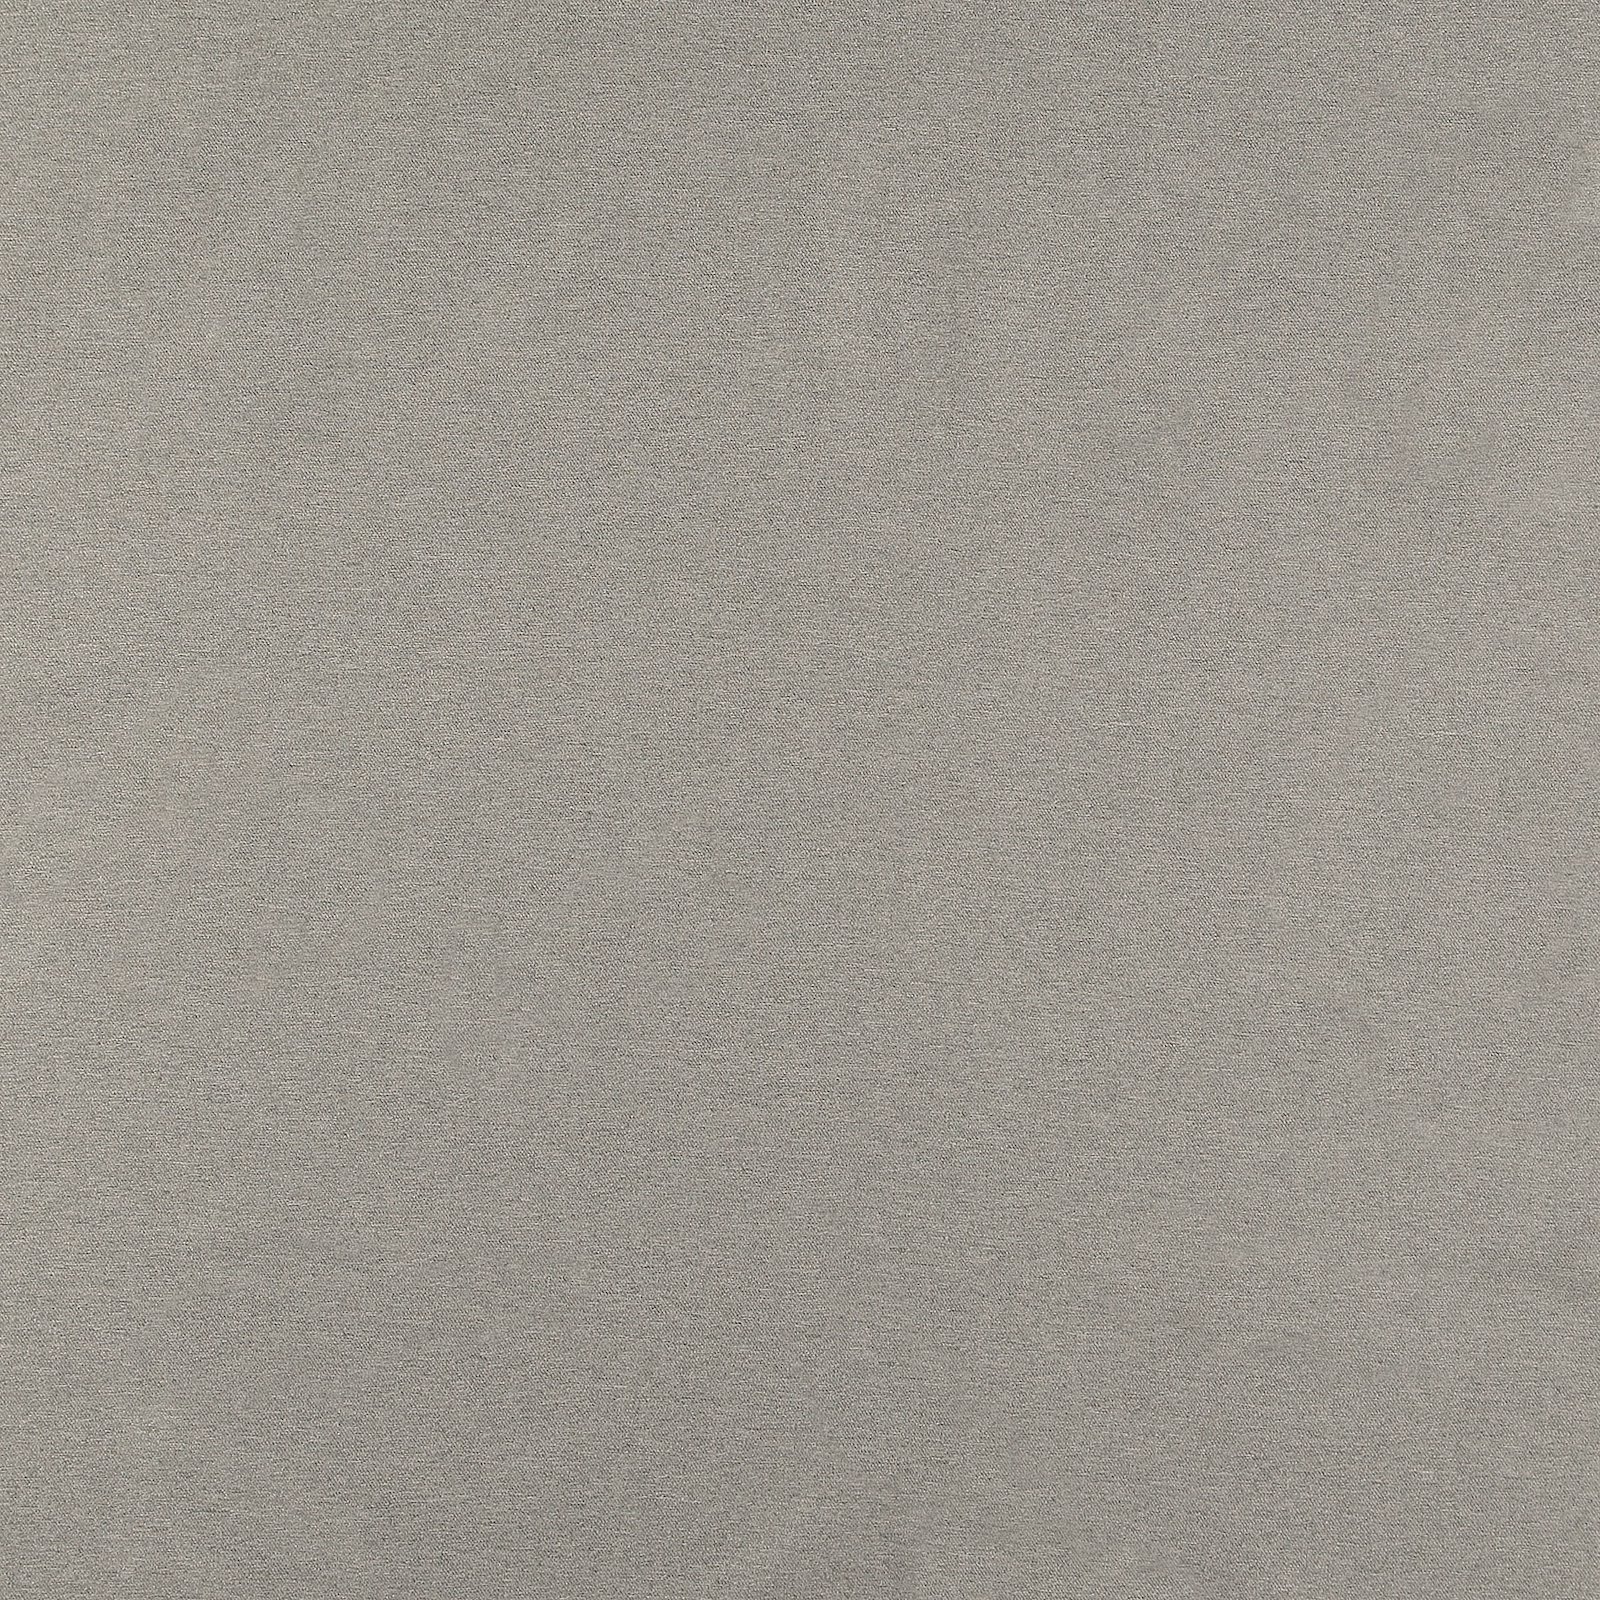 Upholstery fabric light grey brushed 822308_pack_solid